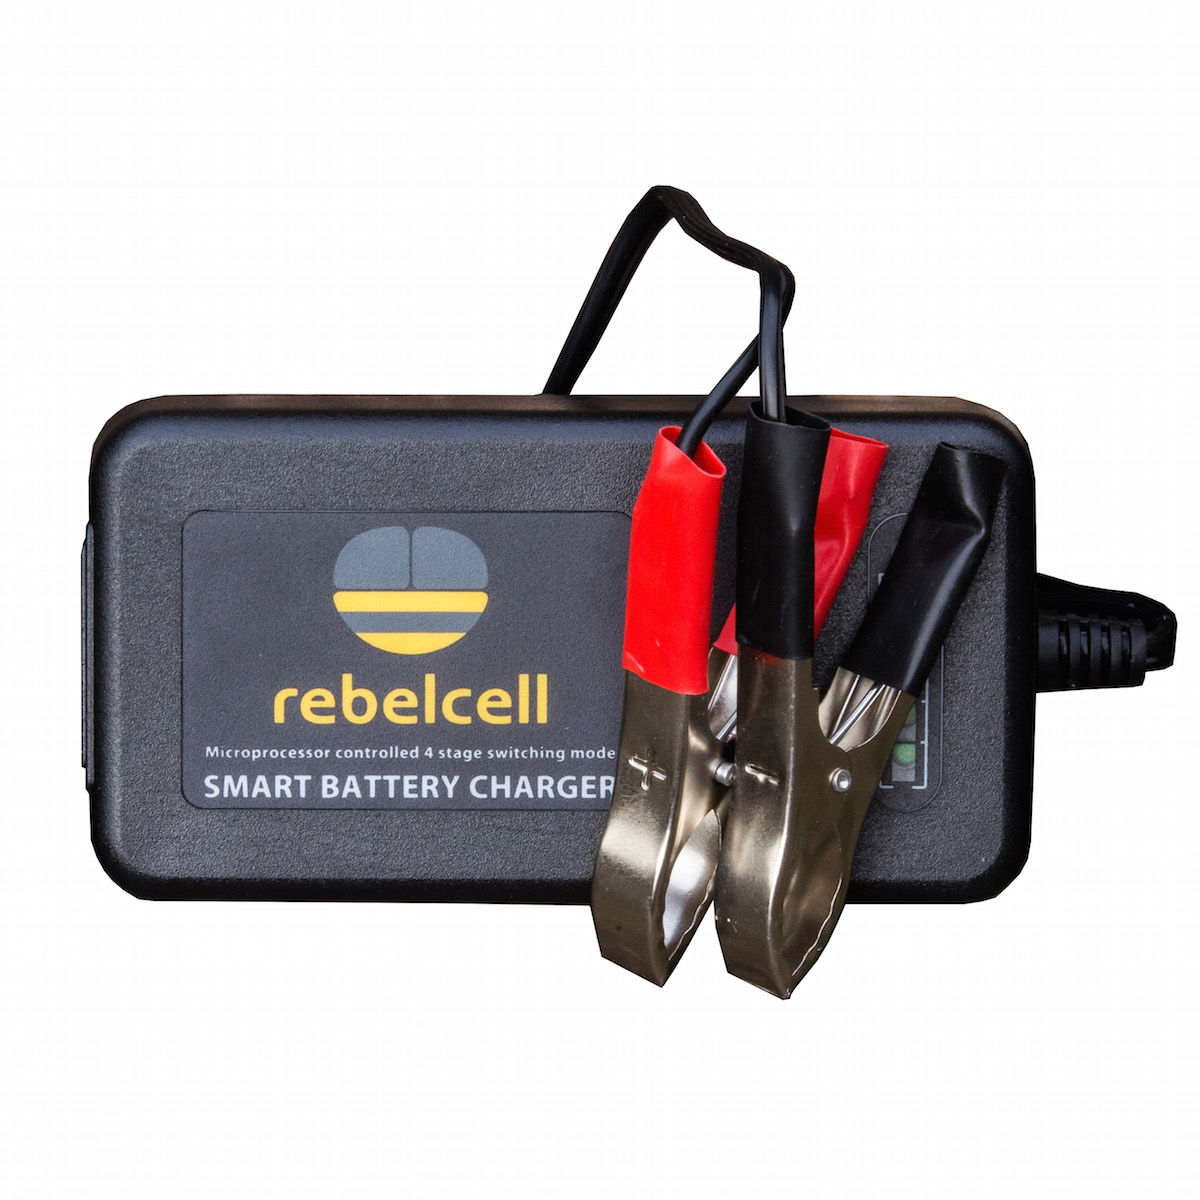 Rebelcell charger 12.6V4A product image